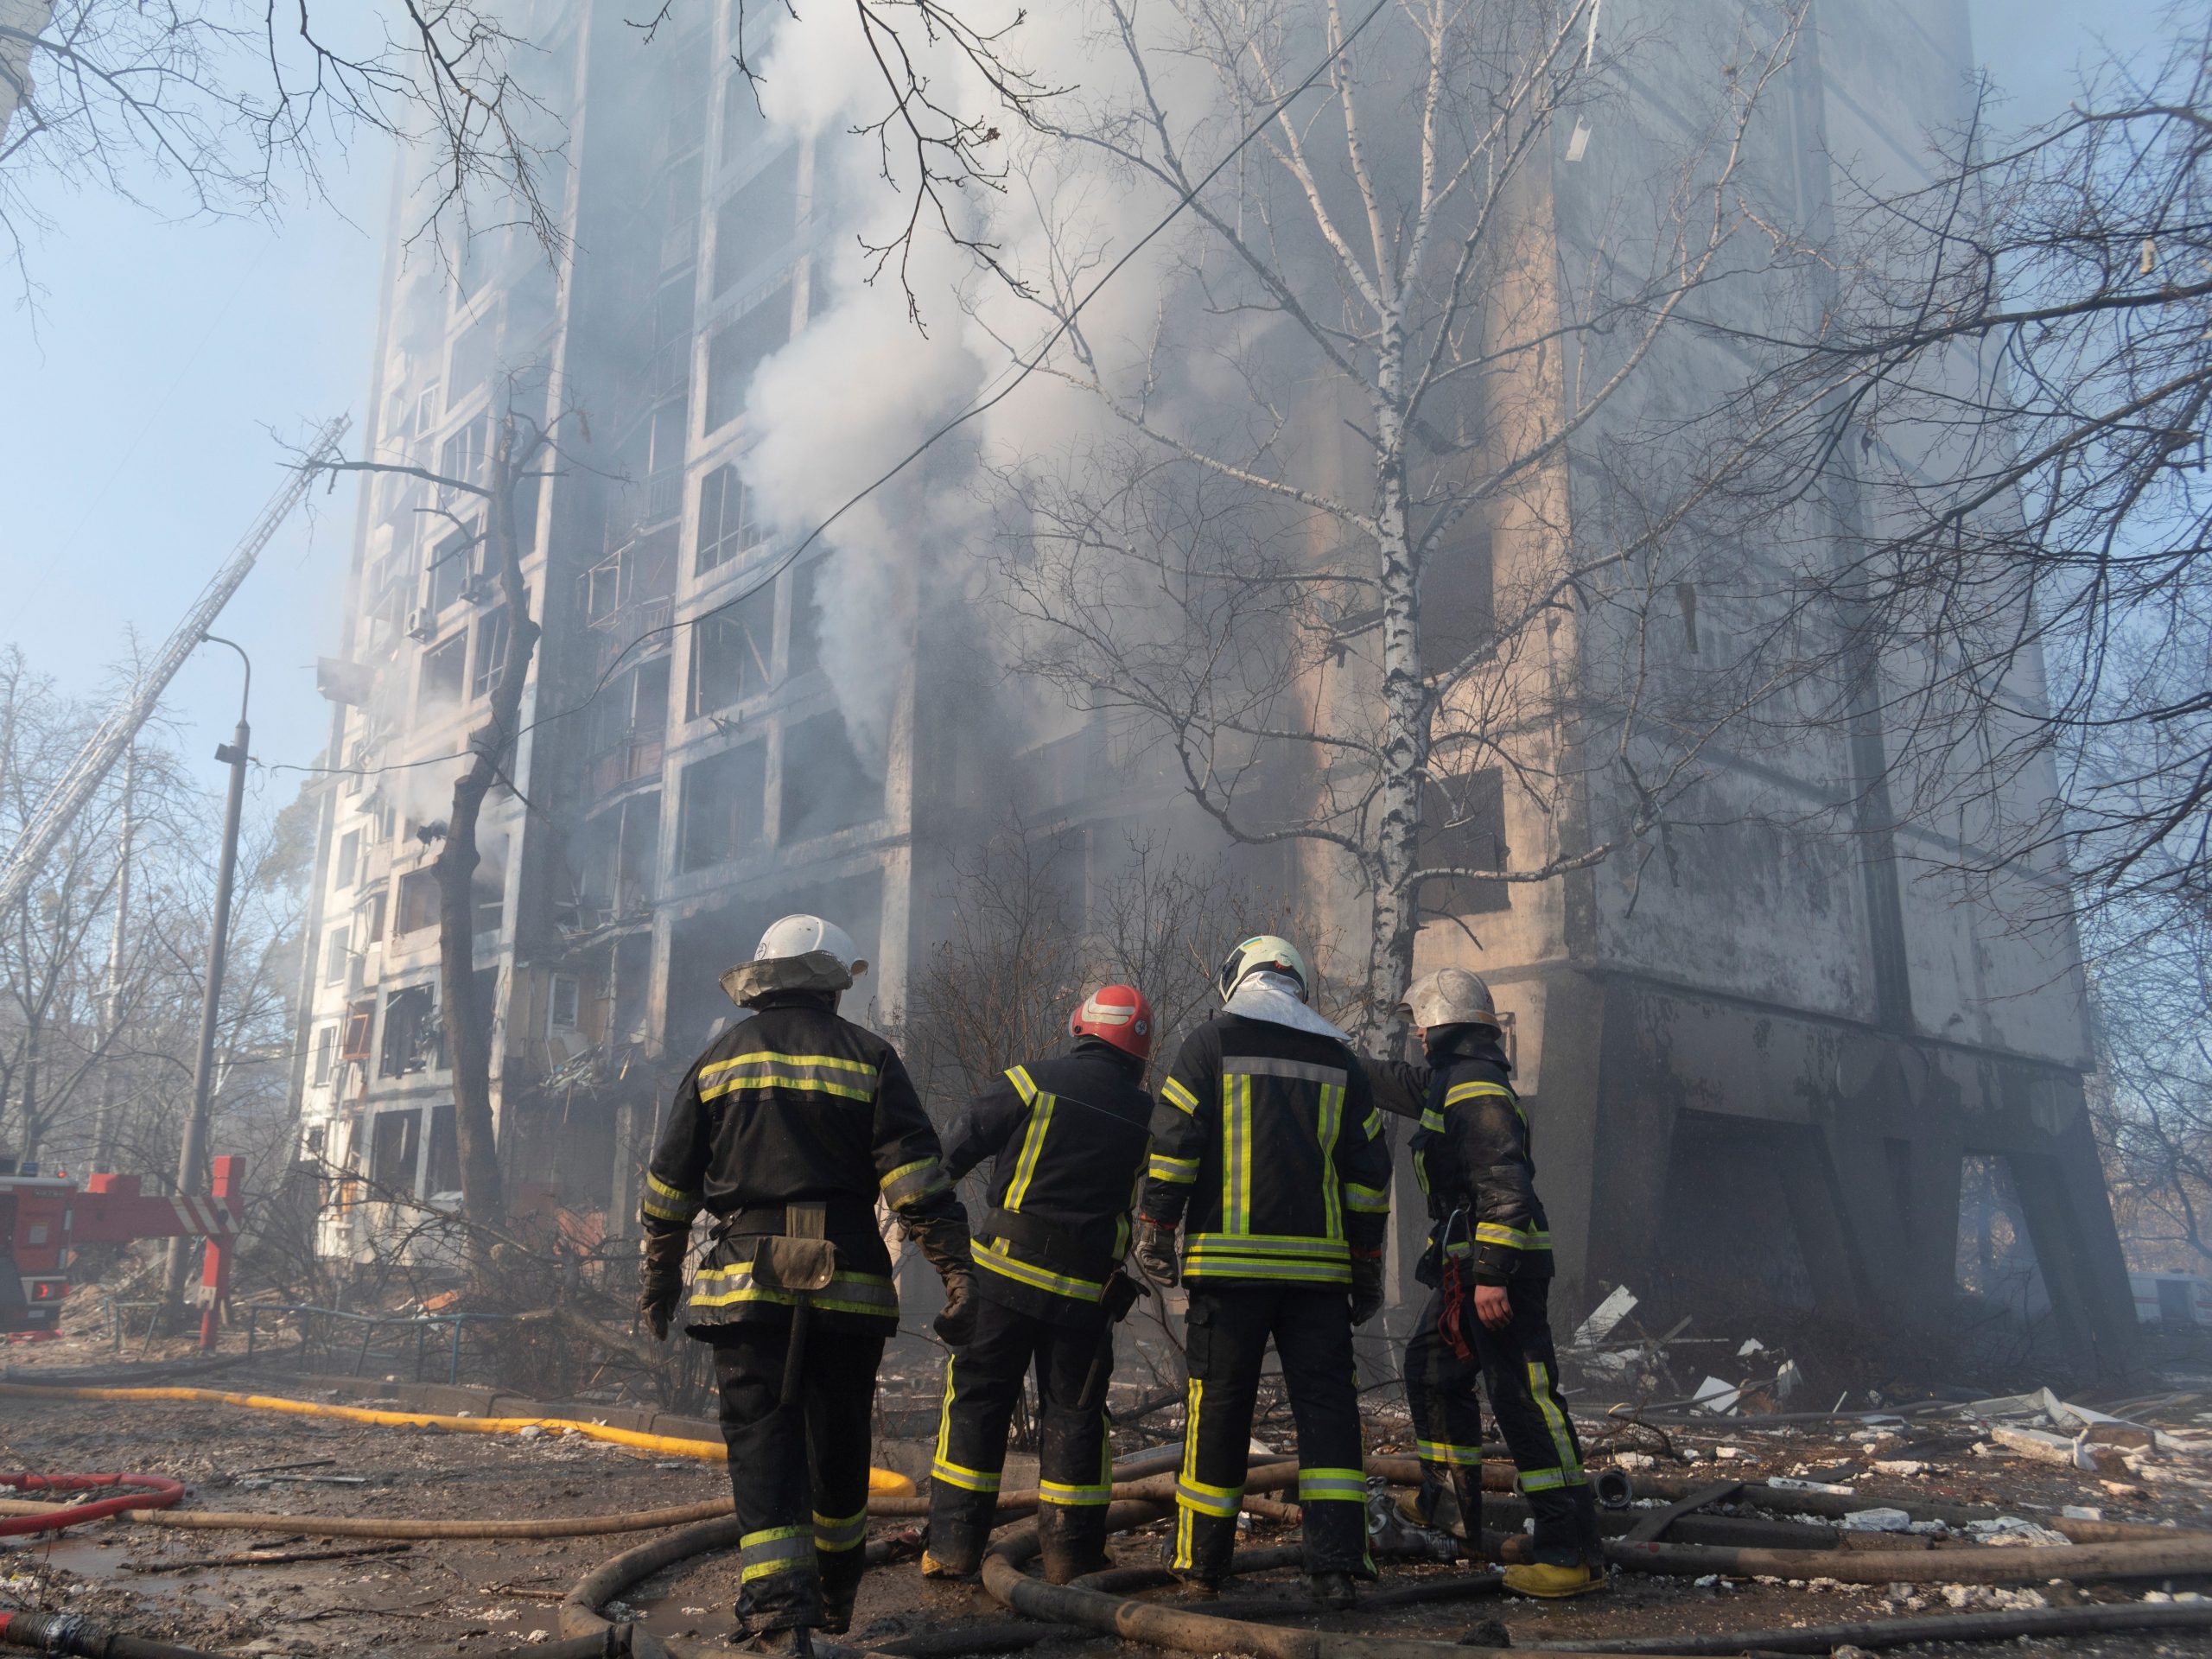 Firemen extinguishing the fire created by Russian shelling in Svyatoshyns'kyi District Kyiv, 12km from the center of the capital, on March 15, 2022.